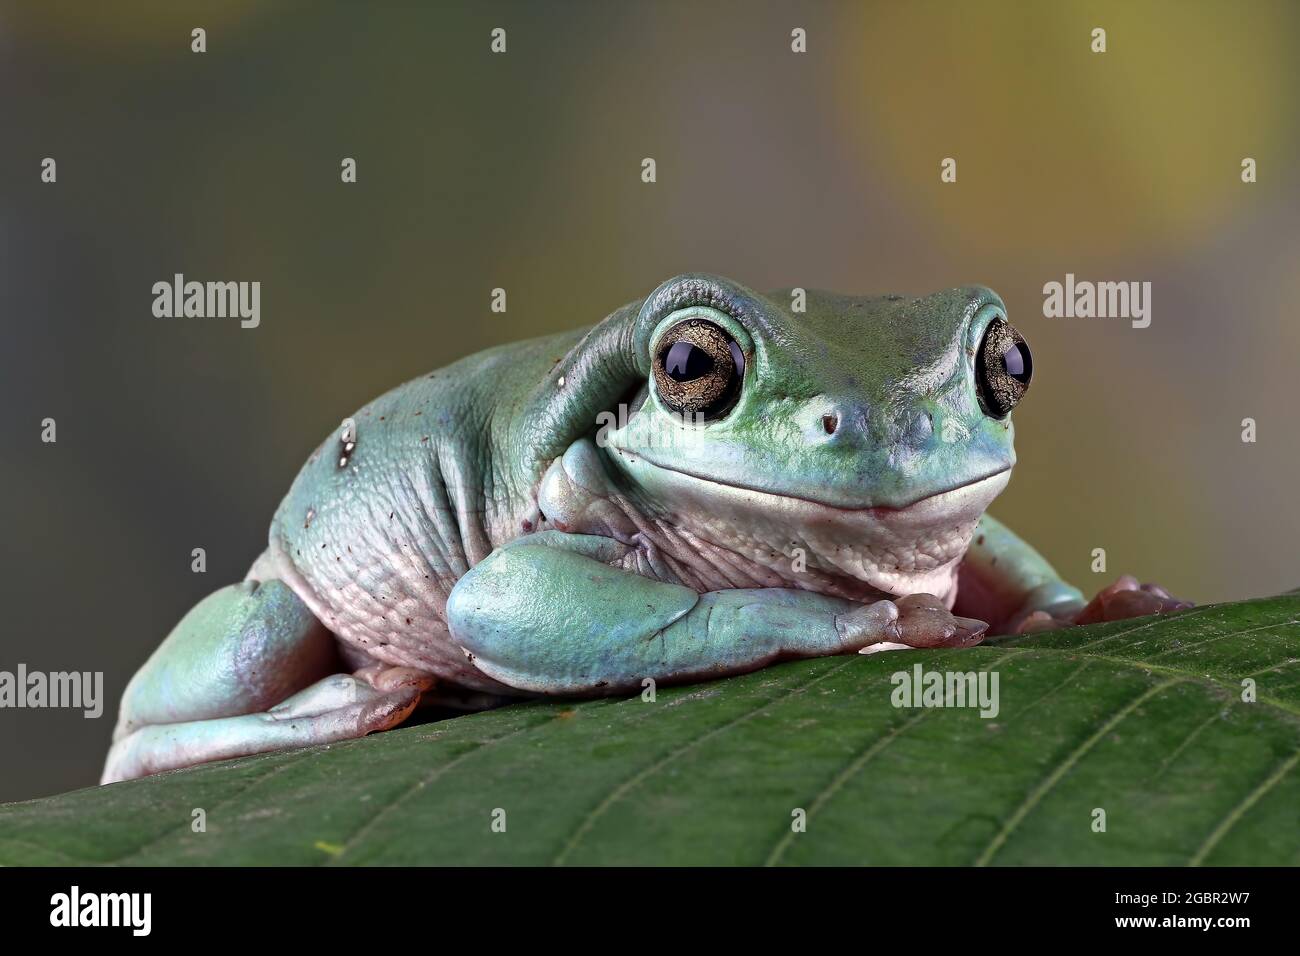 Tree frog sitting on a leaf, dumpy frog close-up Stock Photo